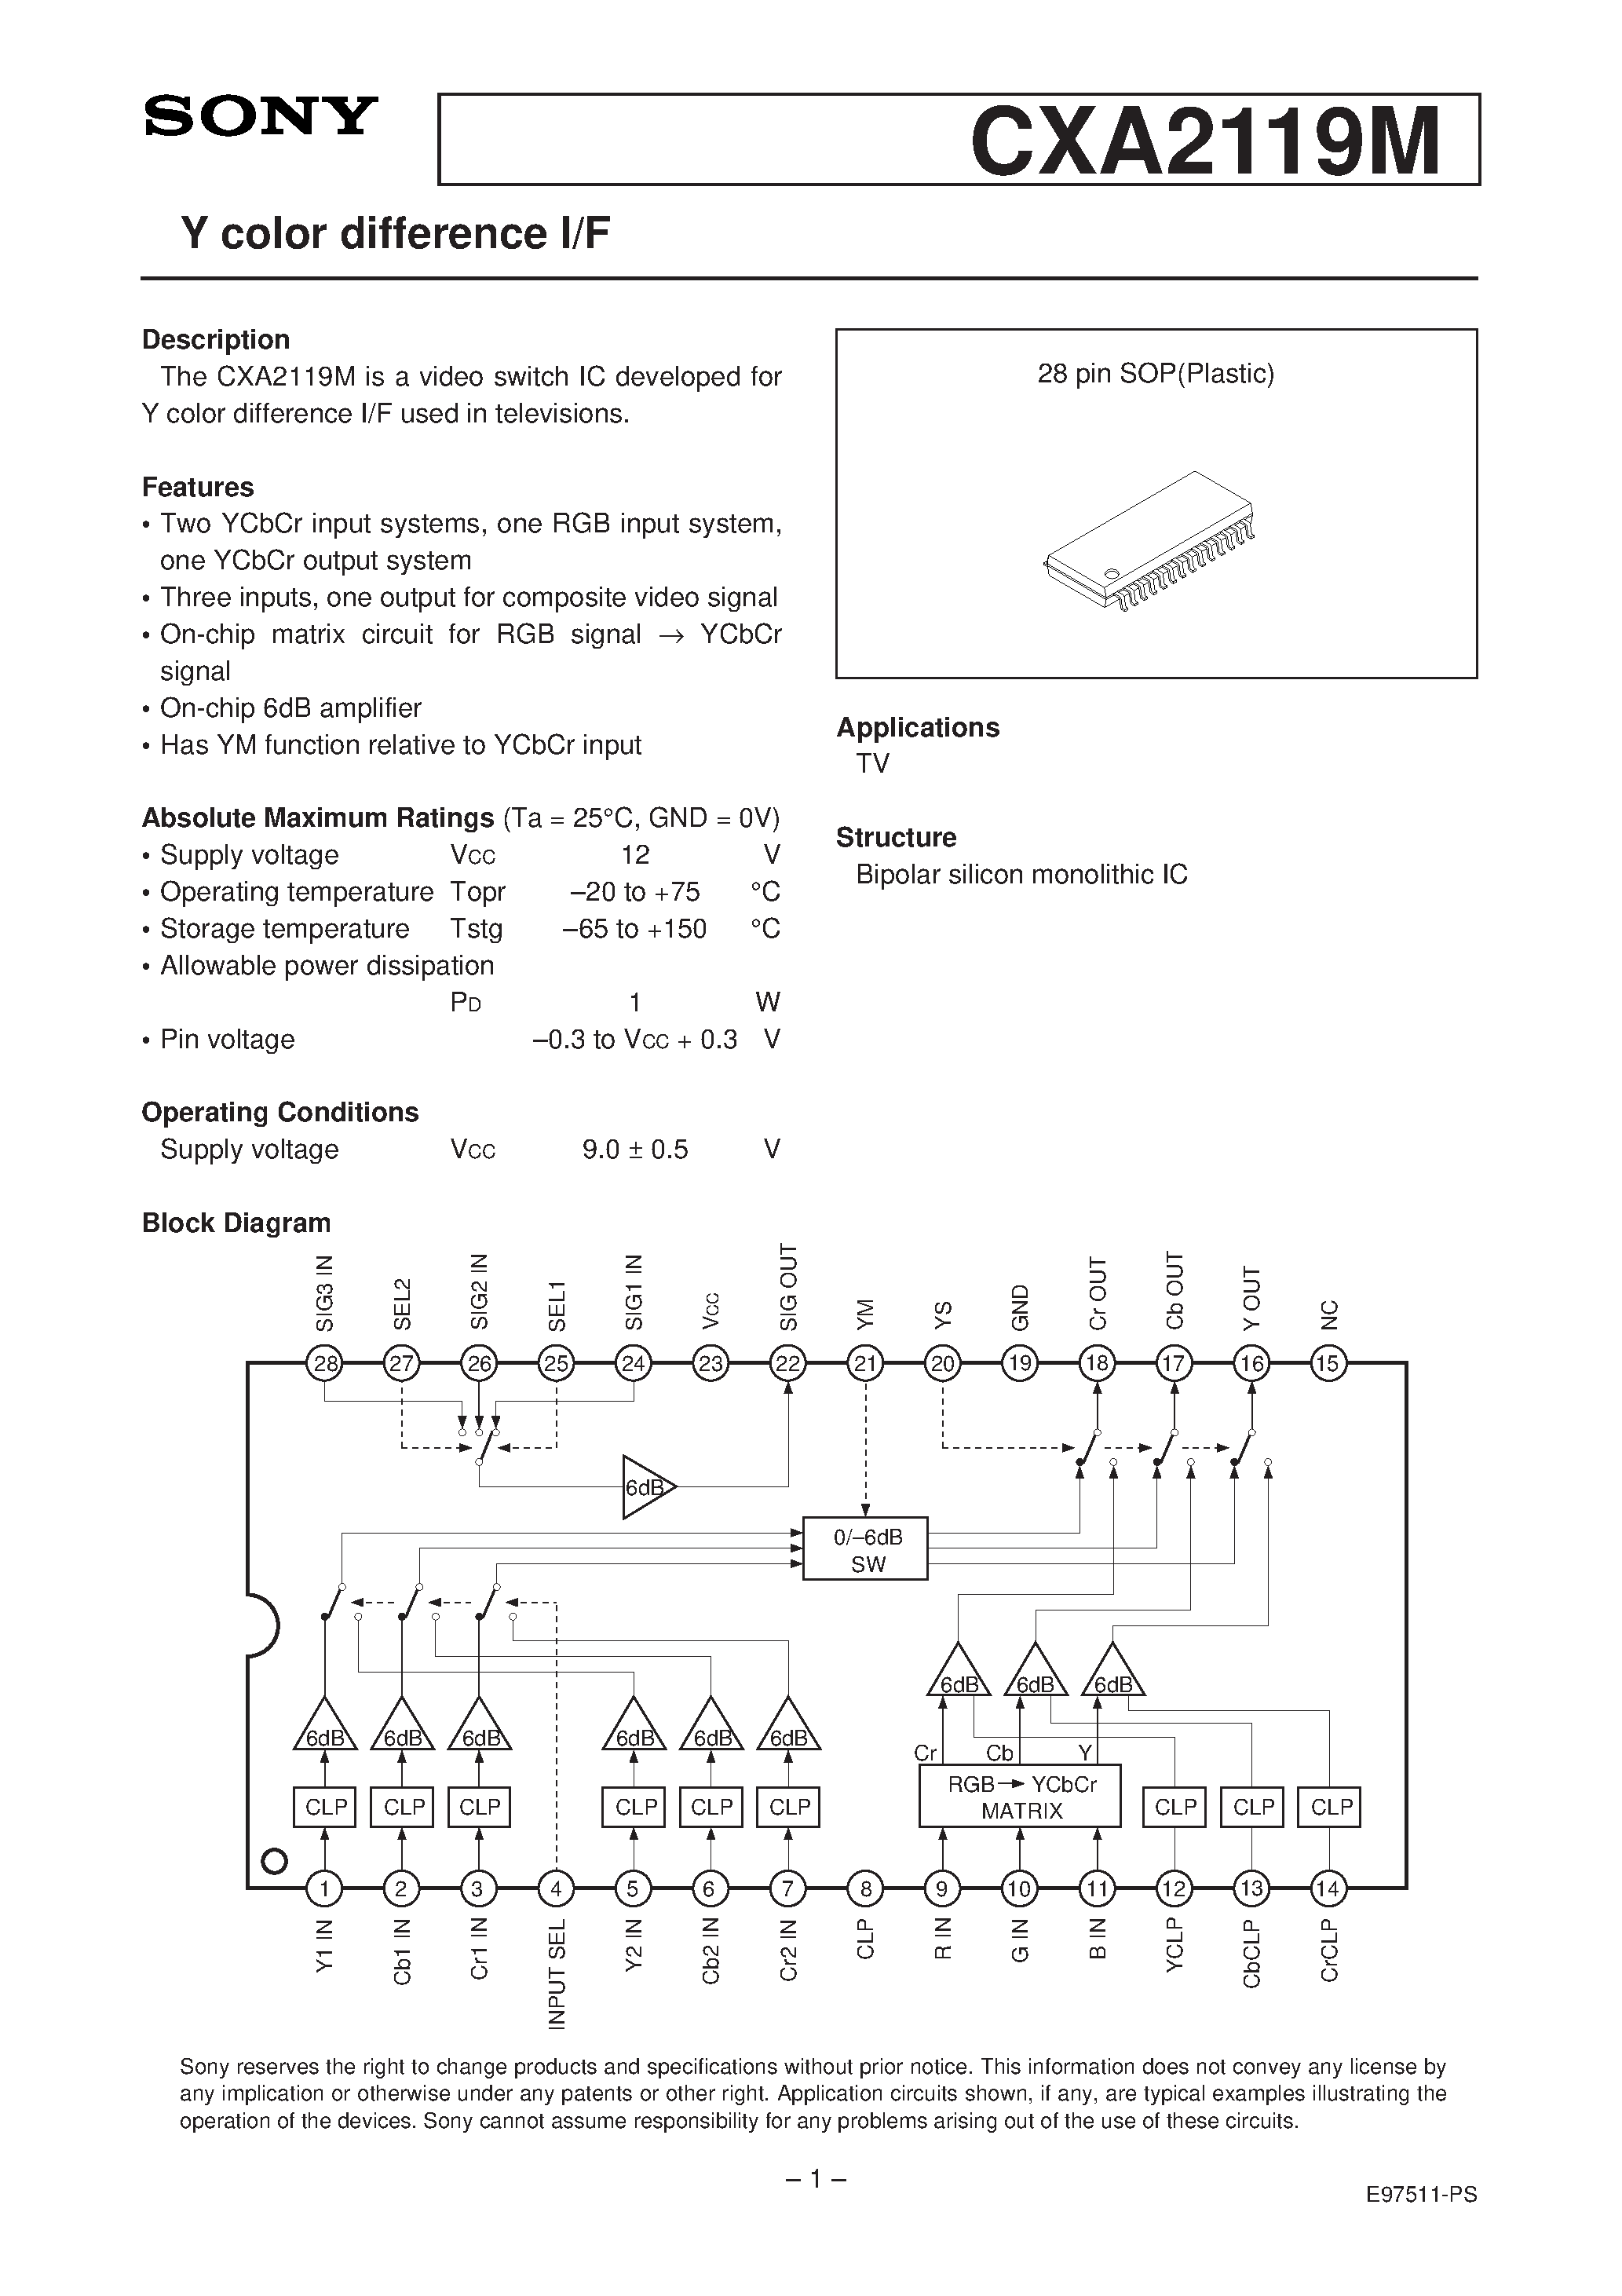 Datasheet CXA2119 - Y color difference I/F page 1